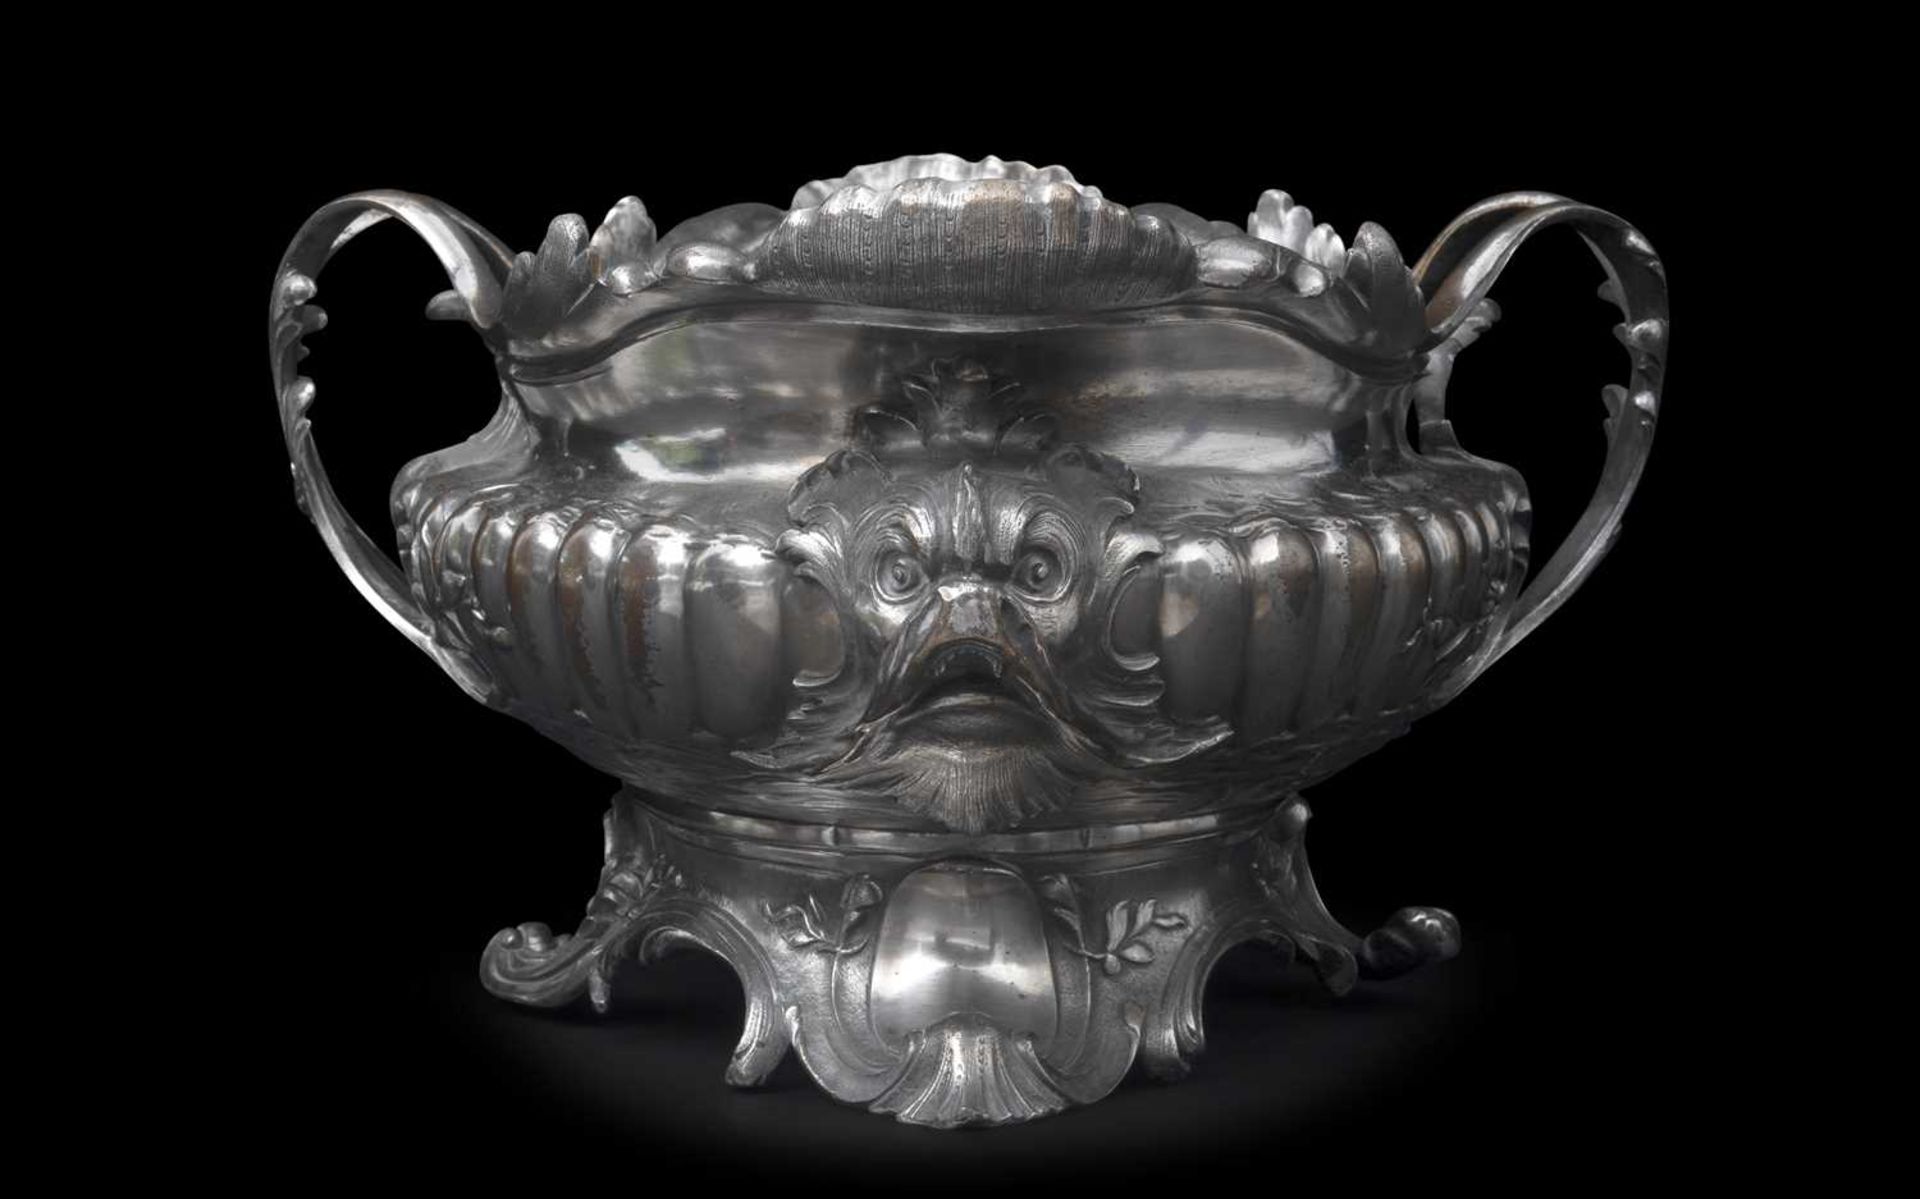 H. LUPPENS & CIE: A LATE 19TH CENTURY SILVERED BRONZE JARDINIERE - Image 2 of 2